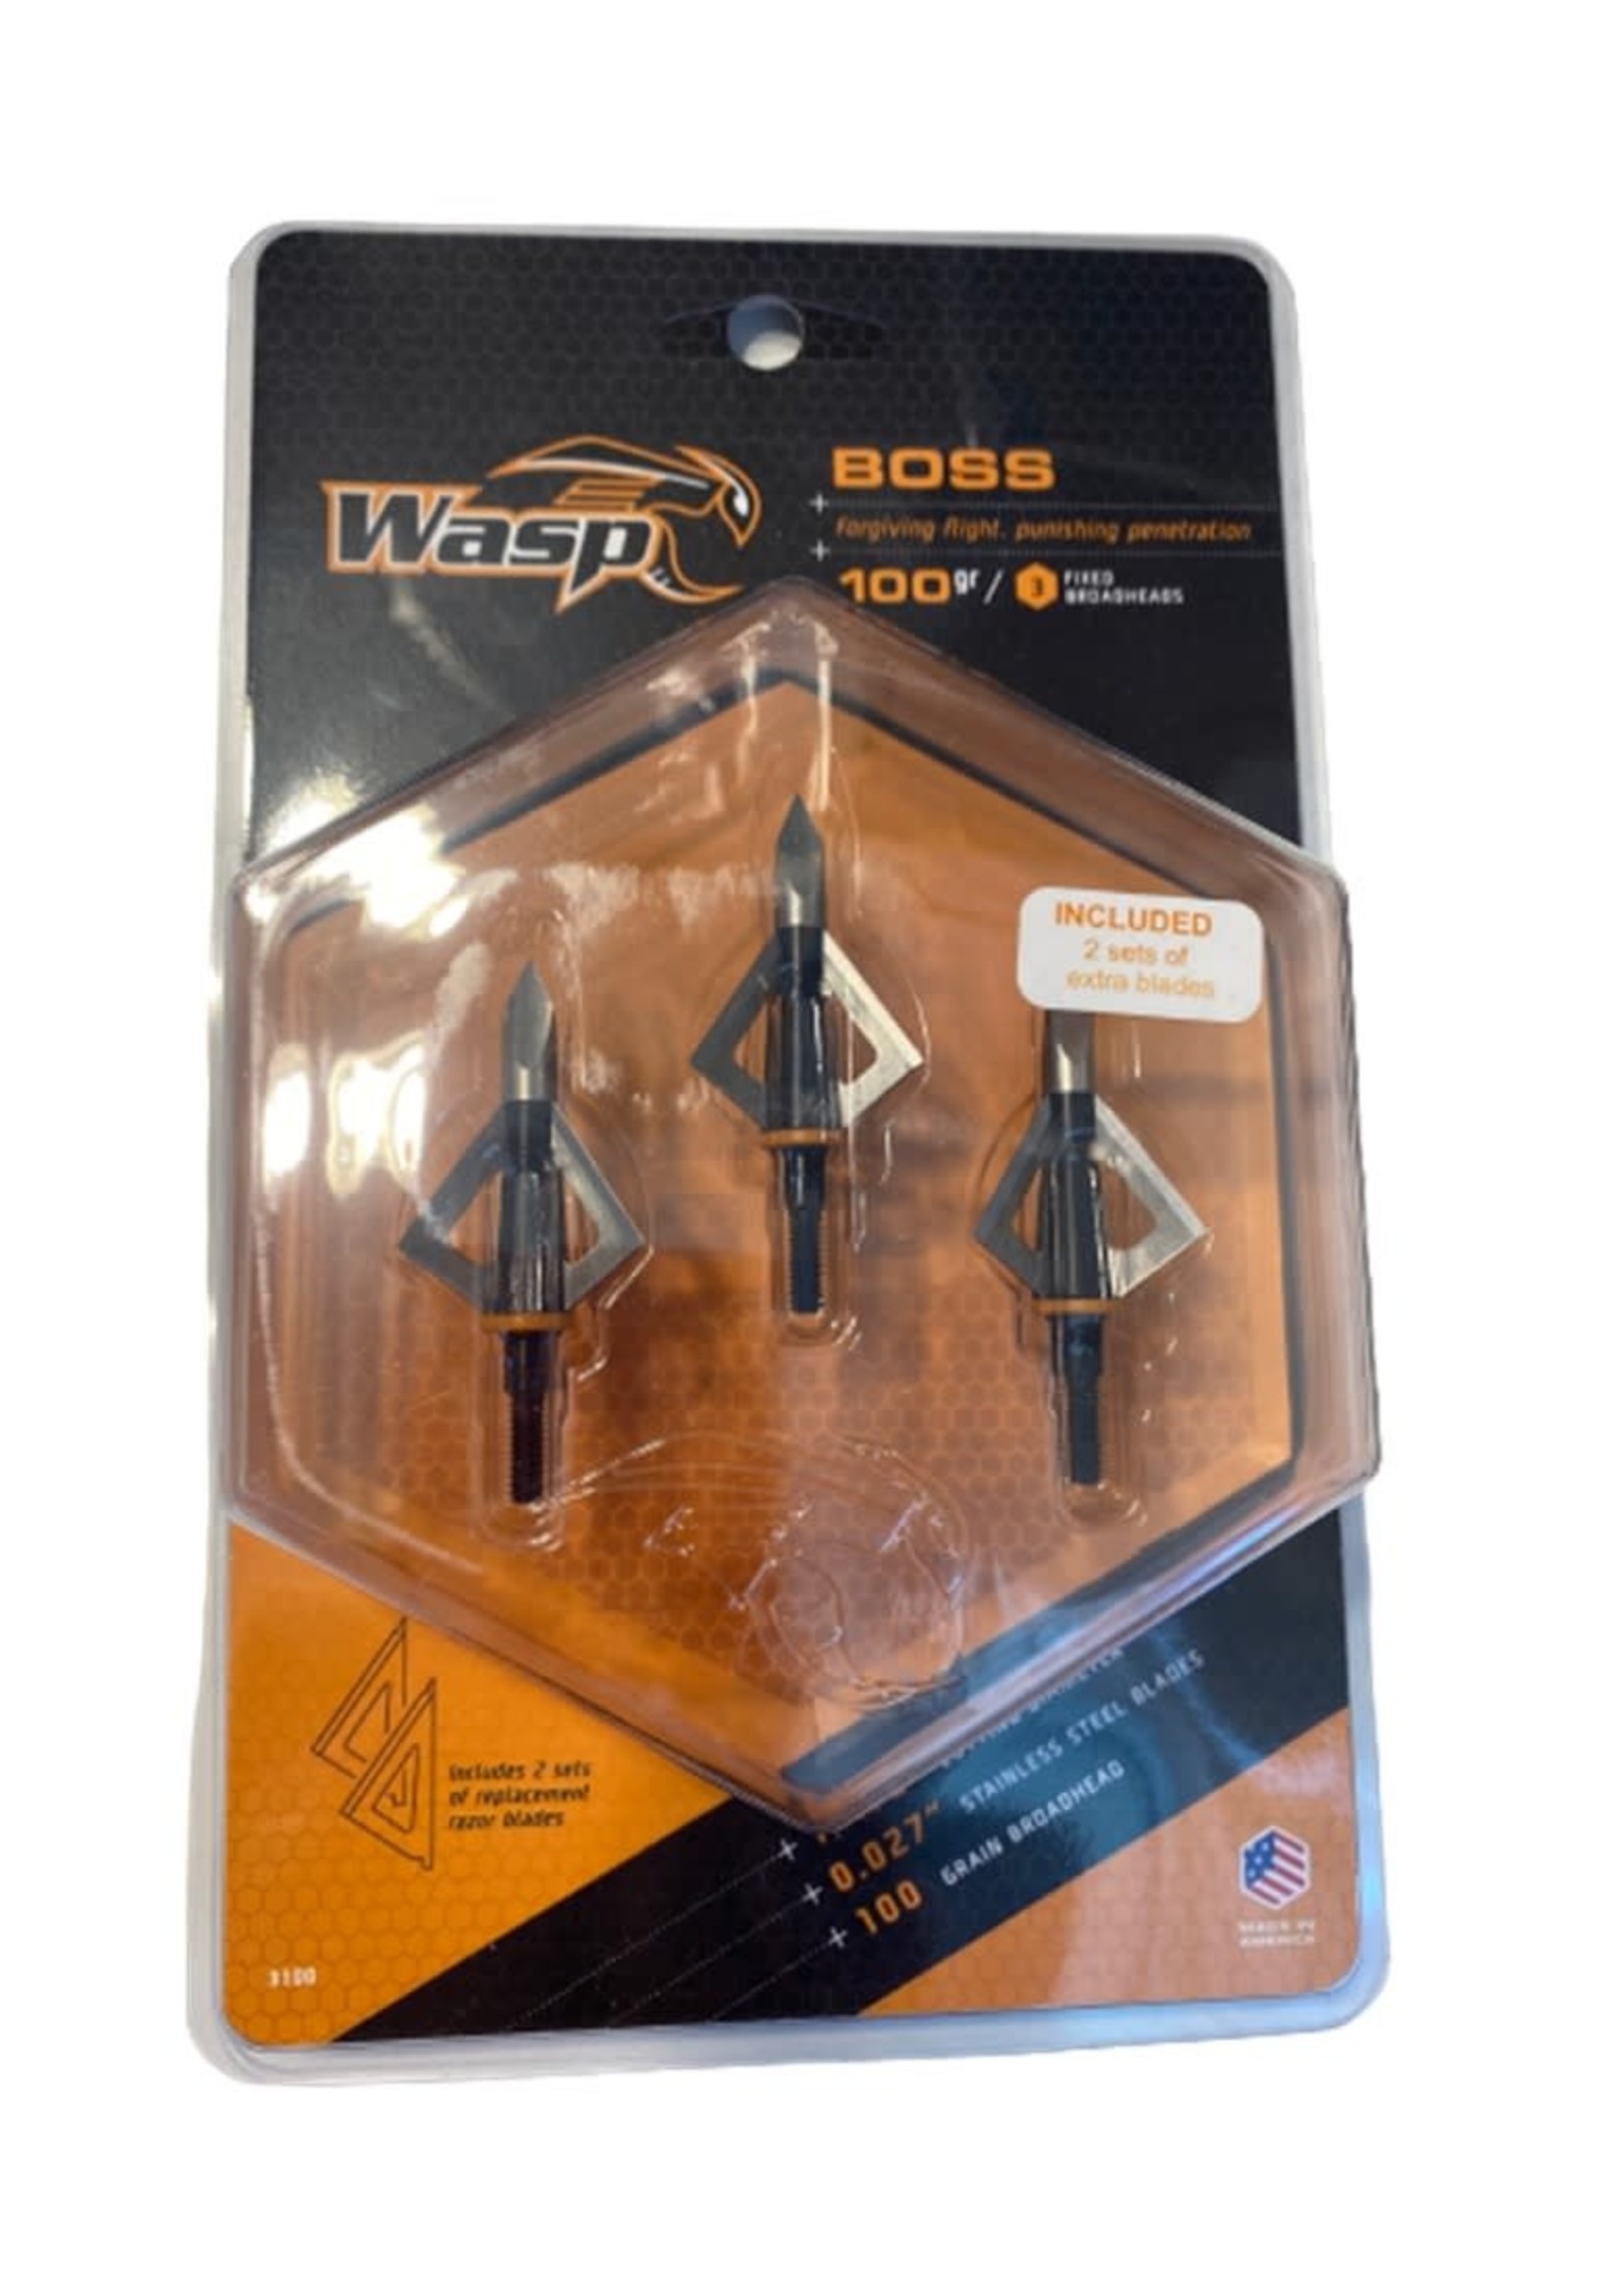 Wasp Boss  3 fixed broadhead 100 gn., 1 1/8" cutting diameter, .027" stainless steel blades - 3 pack